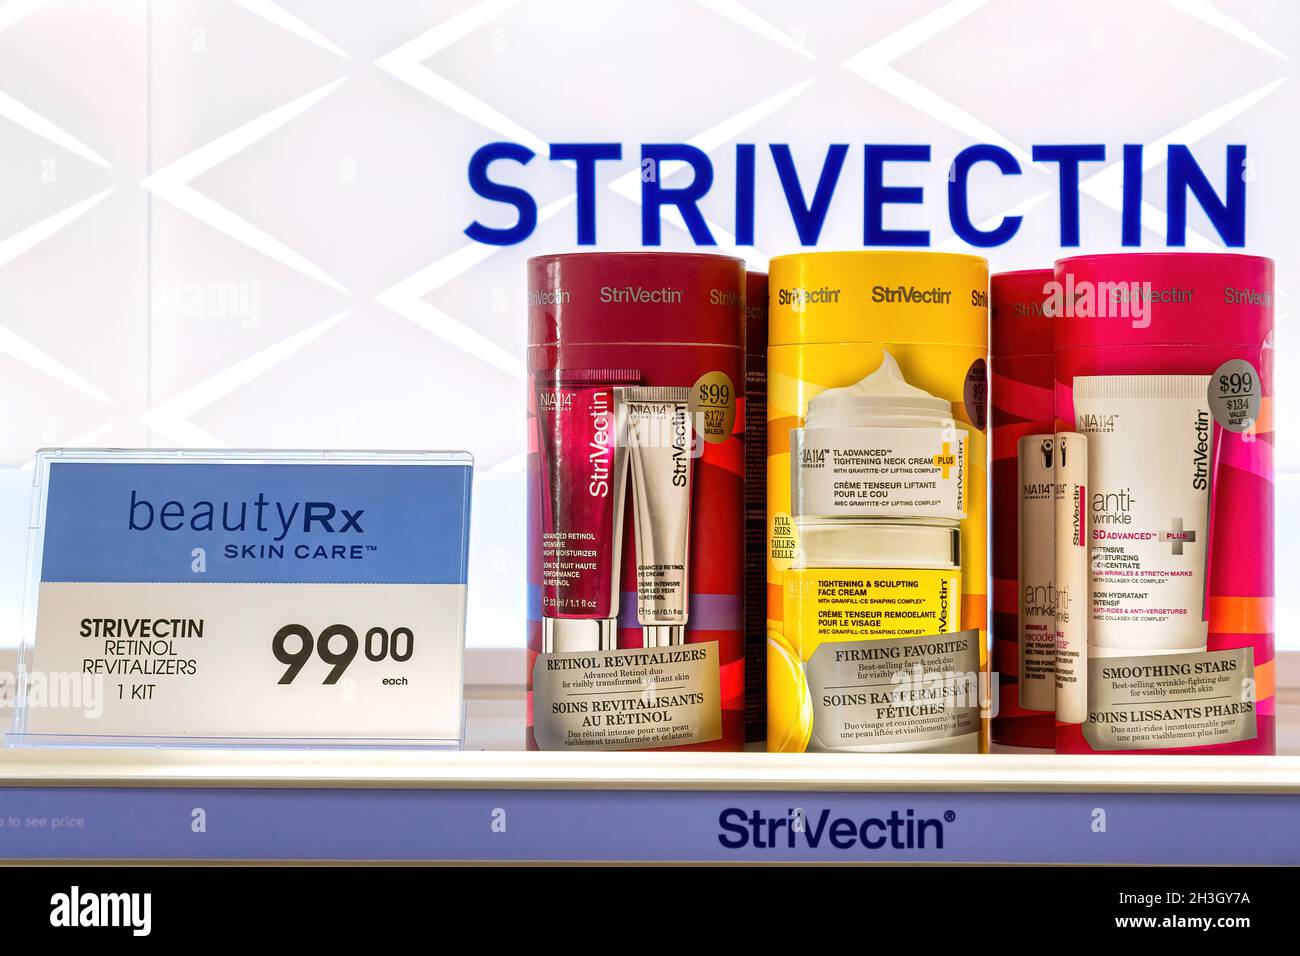 Toronto, Ontario, Canada-October 20, 2019: Boxes with Strivectin products inside. They are on exhibition at a beauty counter. The product has a good d Stock Photo